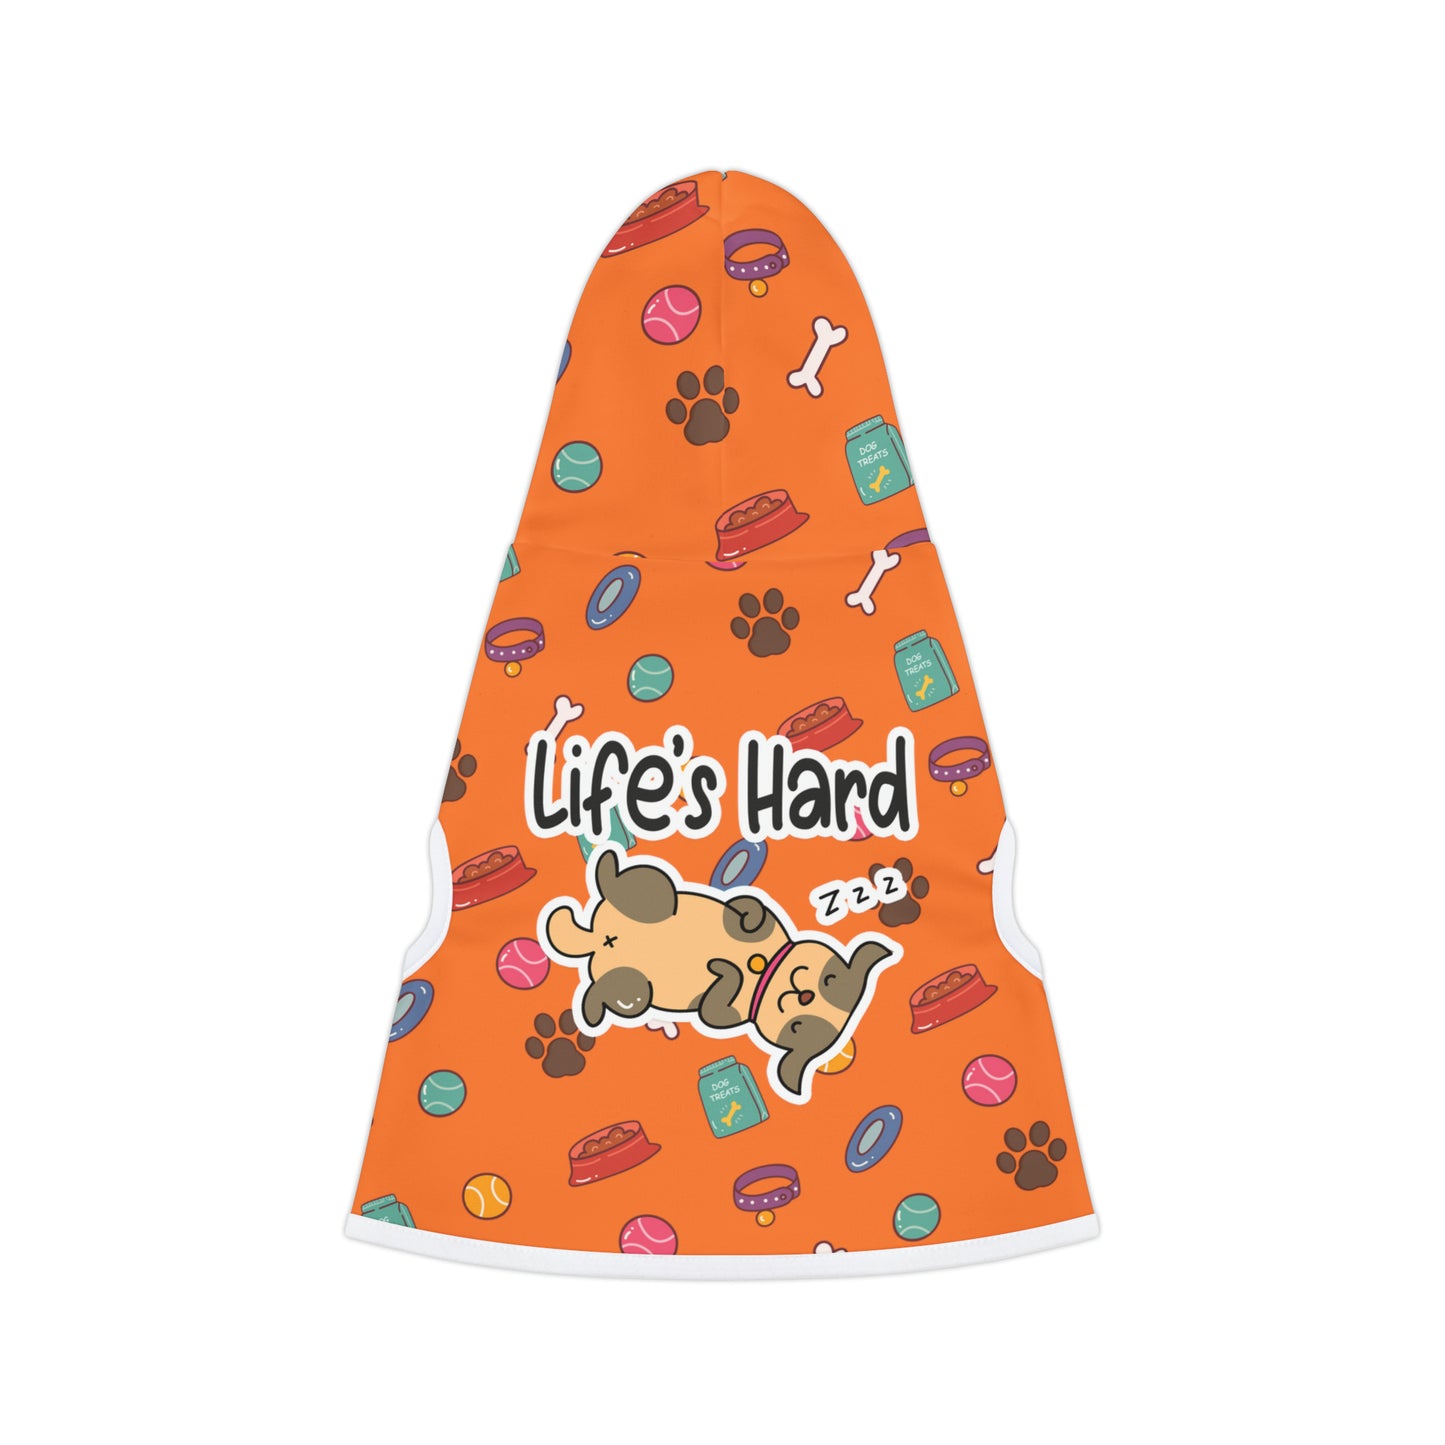 A pet hoodie with a beautiful pattern design featuring all things dog love. A smiling dog sleeping below a message that says "Life's hard". Hoodie's Color is orange